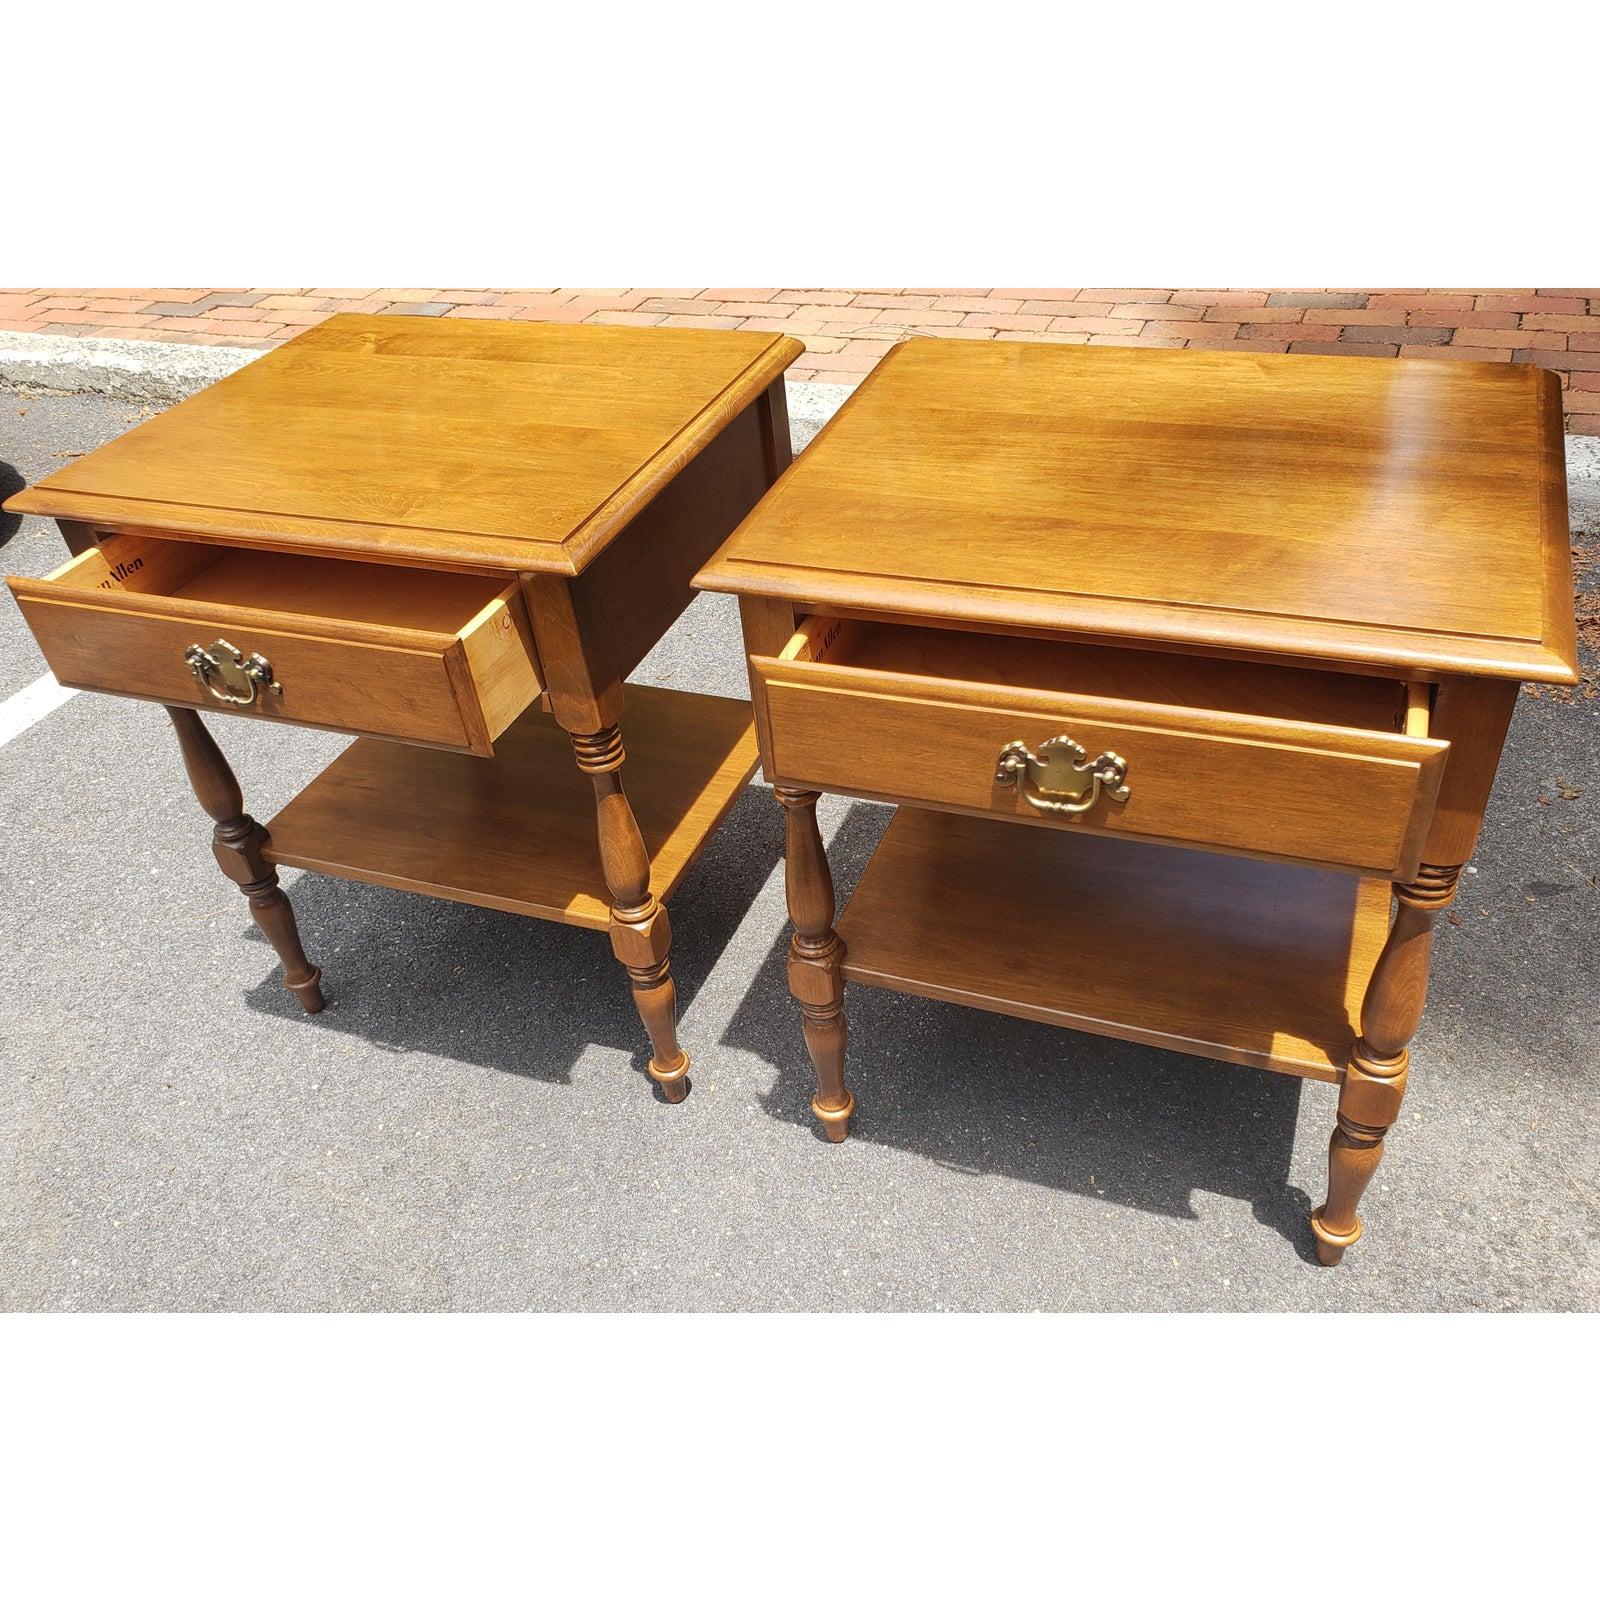 Magnificent pair of solid maple vintage side tables / nightstands. Two tier tables with one drawer and one shelf.
Tables measures 22.5? wide x 18 3/8? deep x 26H tall.

W 3LRL
 